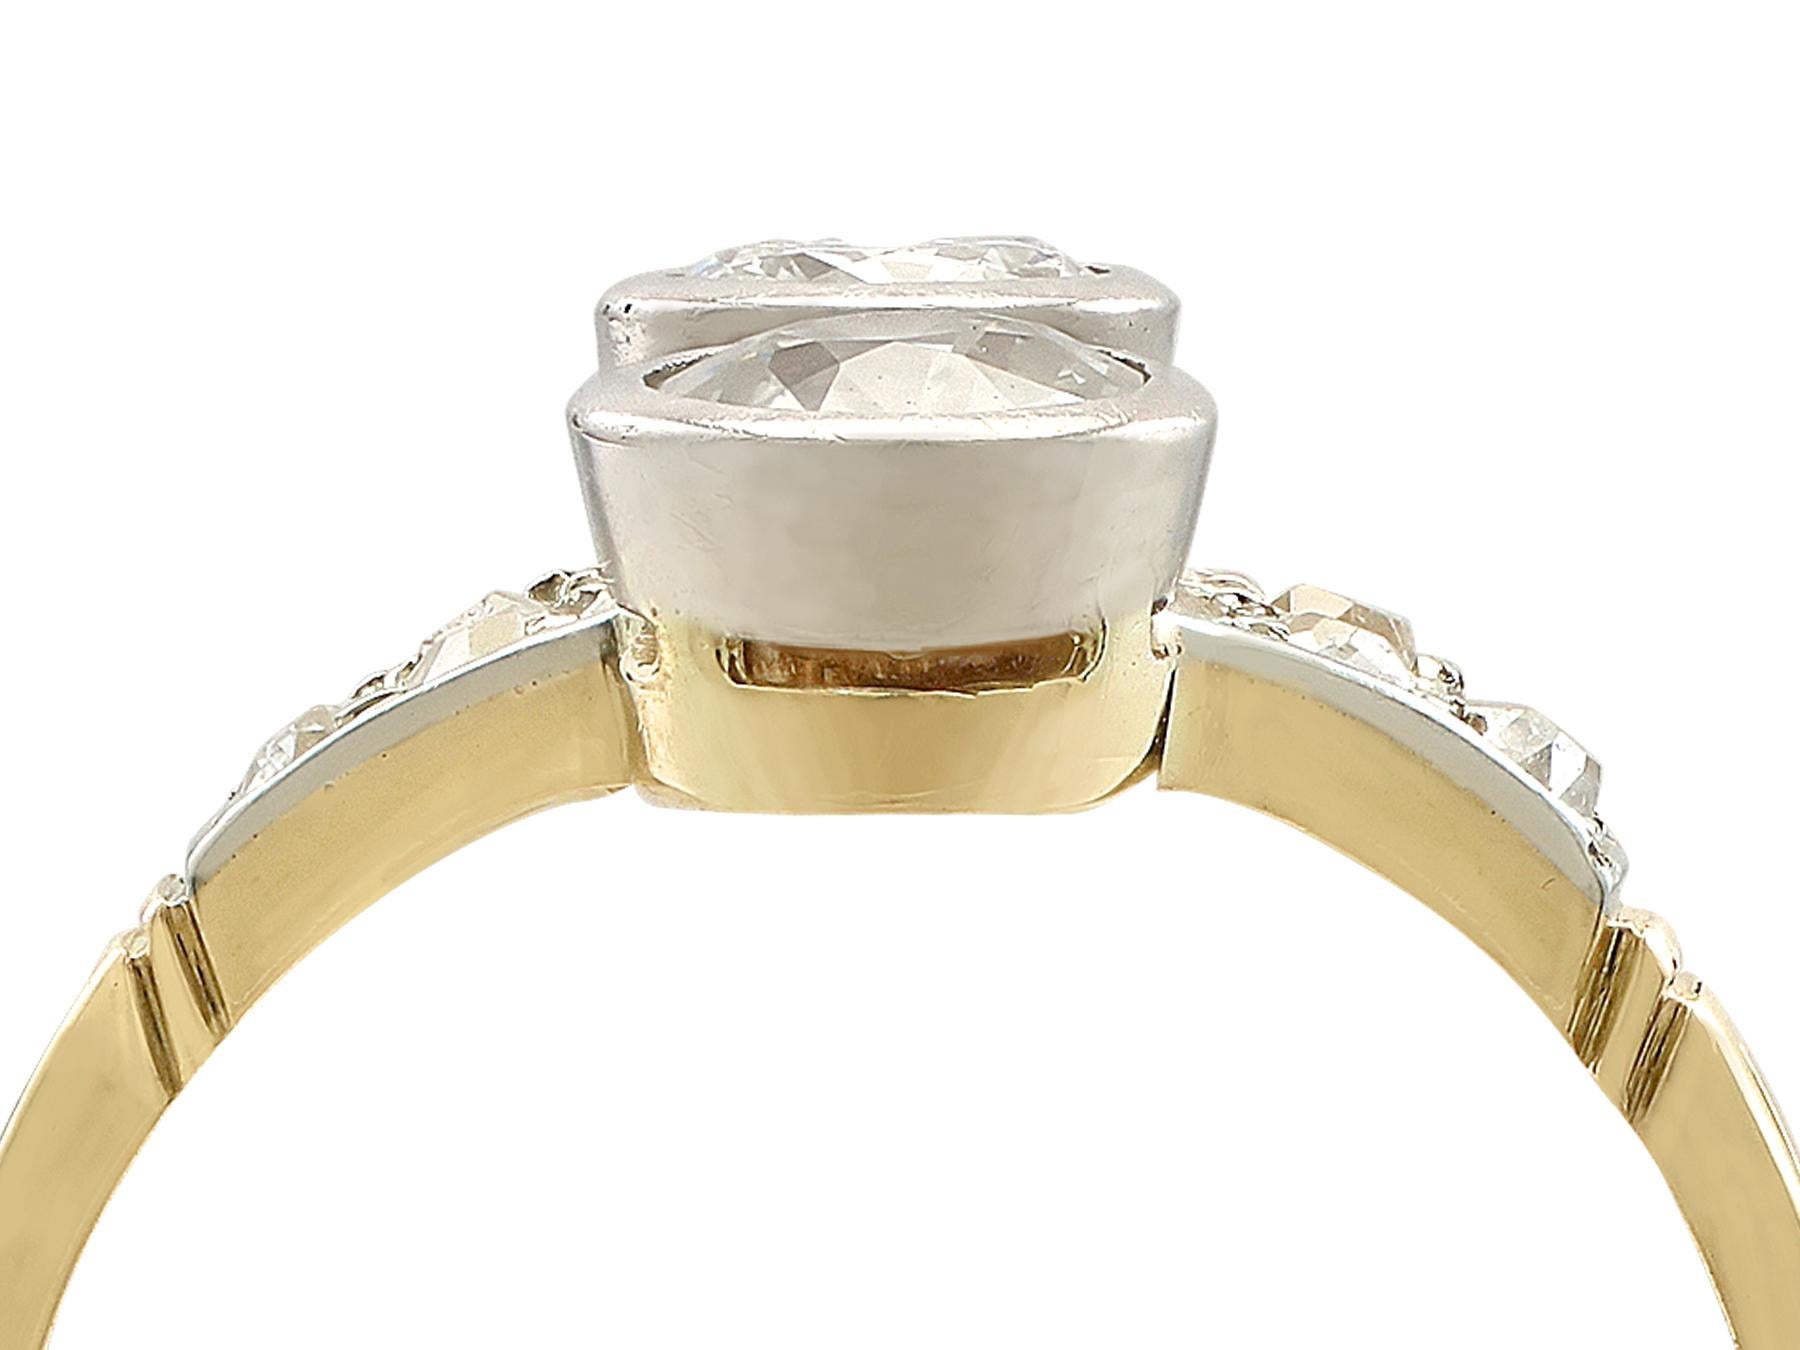 An impressive antique 1.29 carat diamond and 15 karat yellow gold, 18 karat white gold set dress ring; part of our diverse antique jewelry and estate jewelry collections.

This fine and impressive antique diamond dress ring has been crafted in 15k